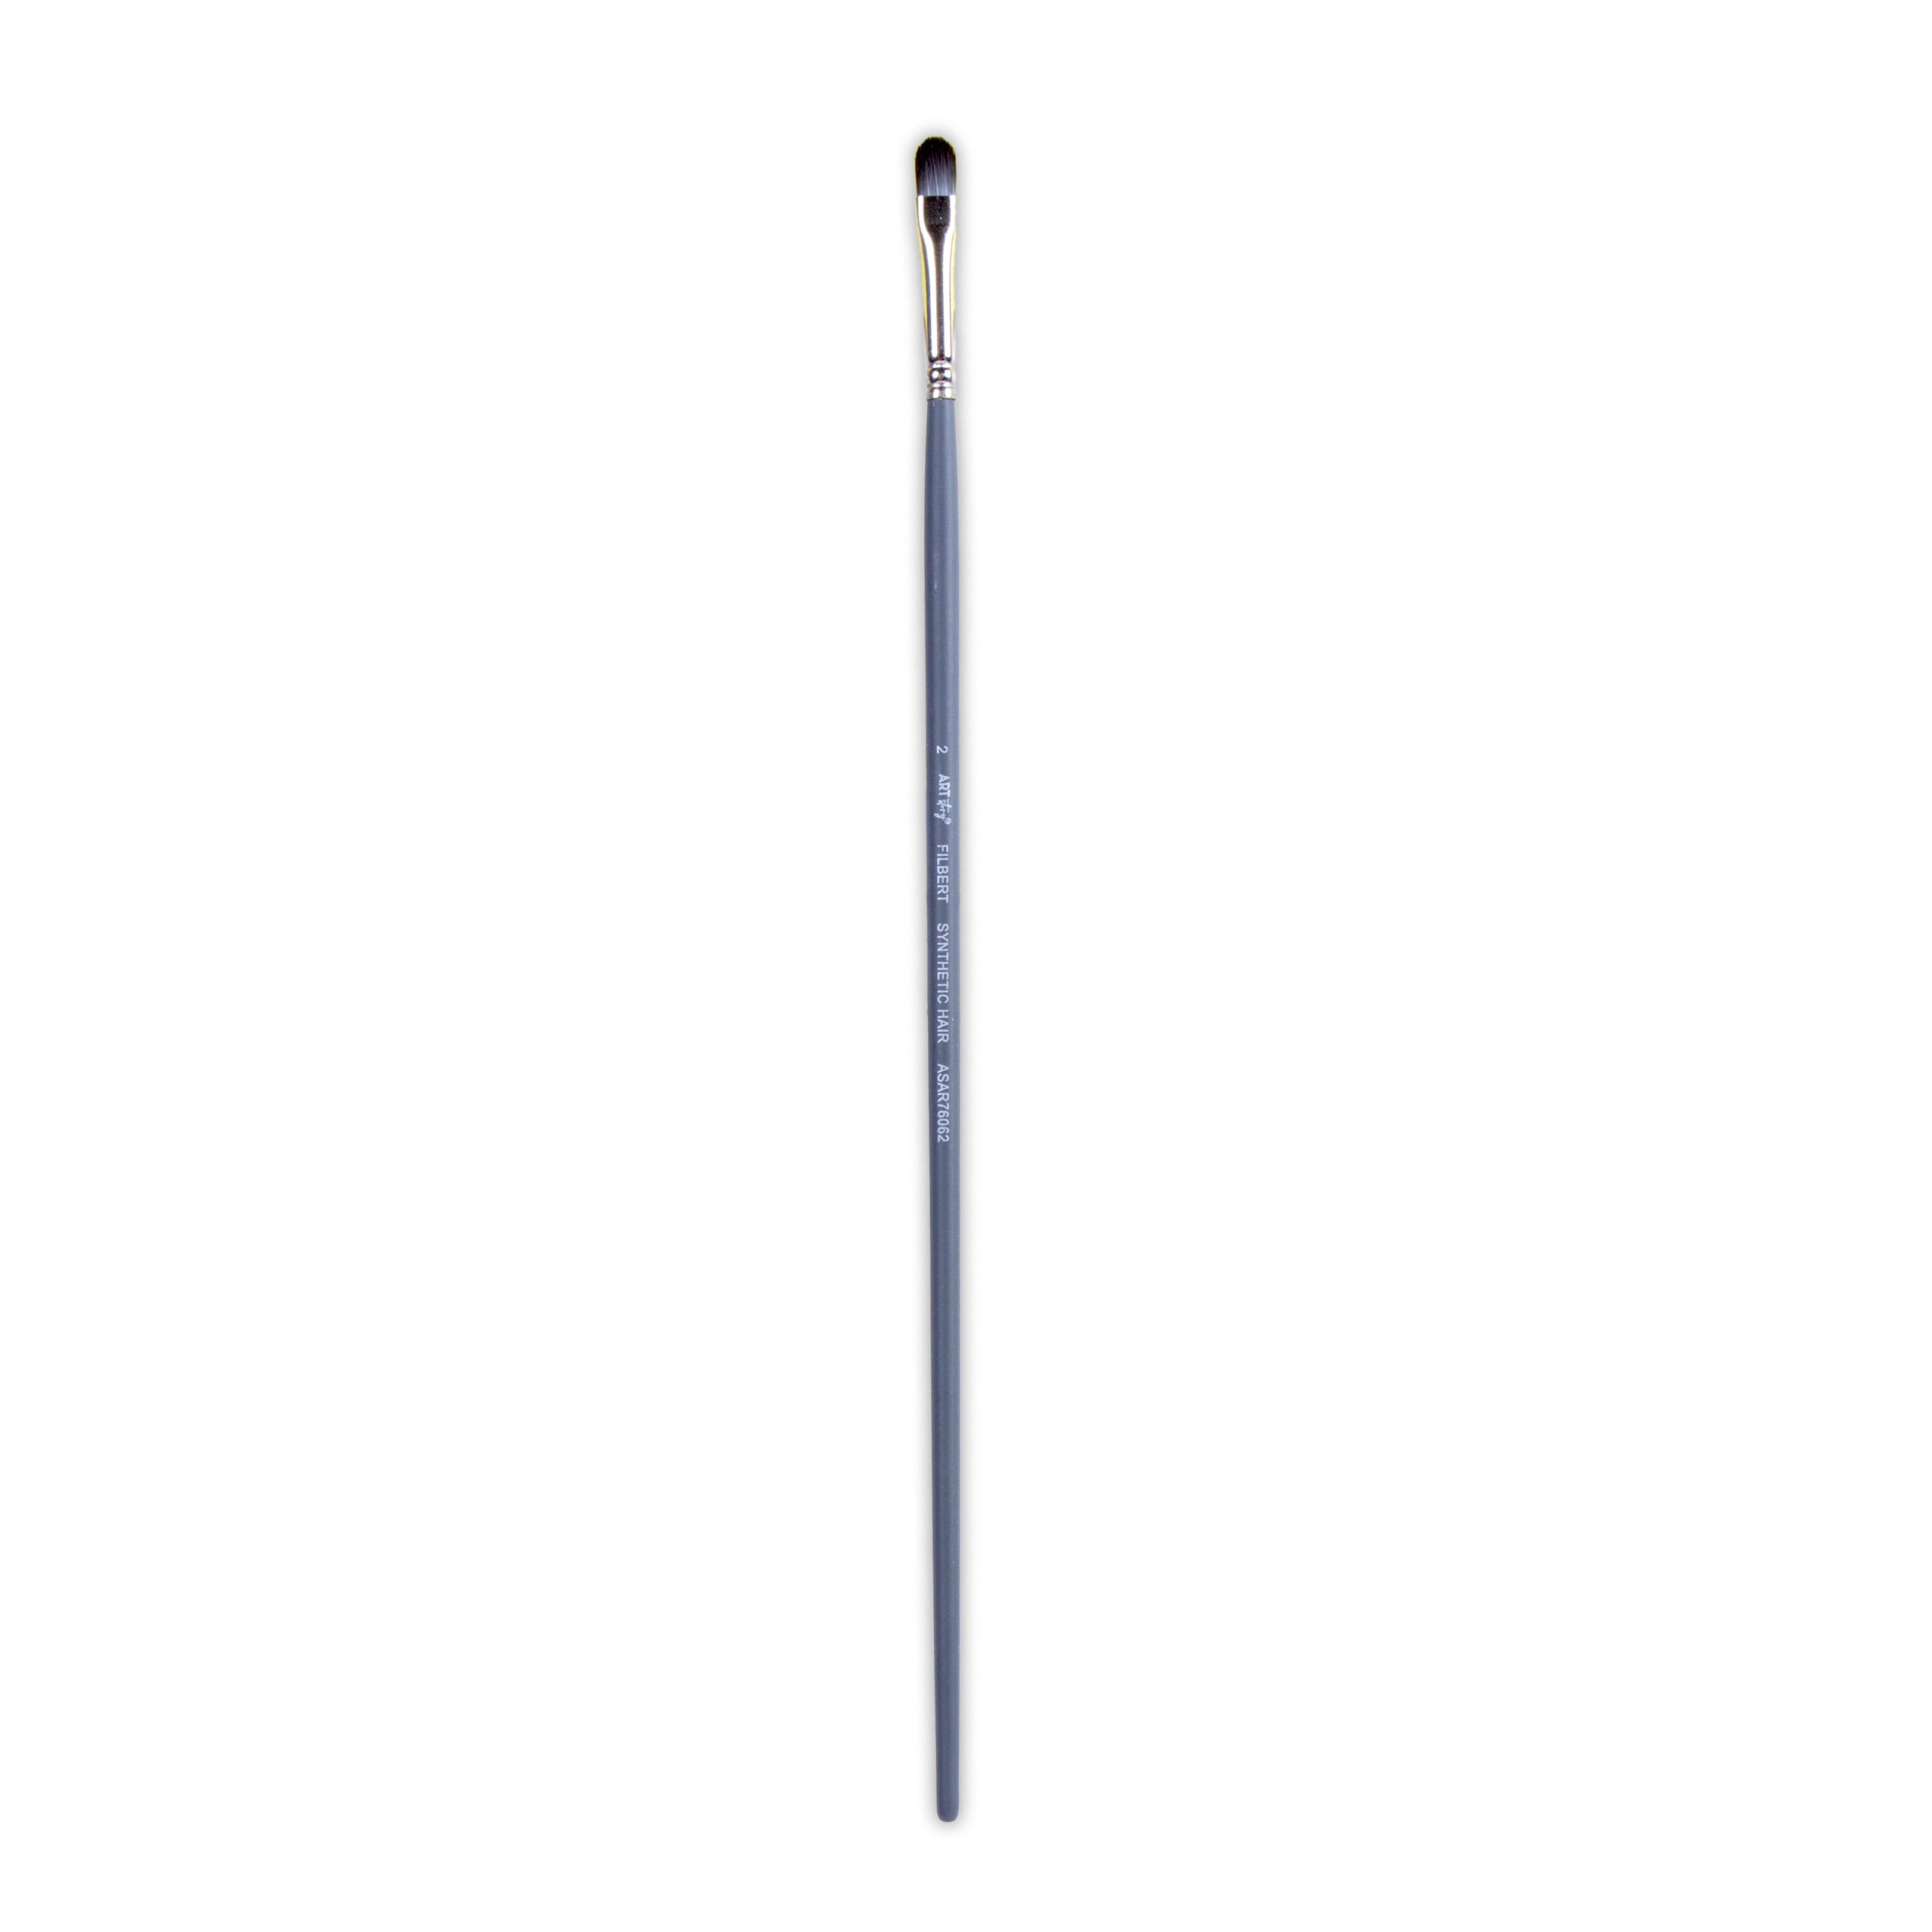 Long Handle Filbert Brush Synthetic Hair Size 2 Handle Length 250mm 1pc